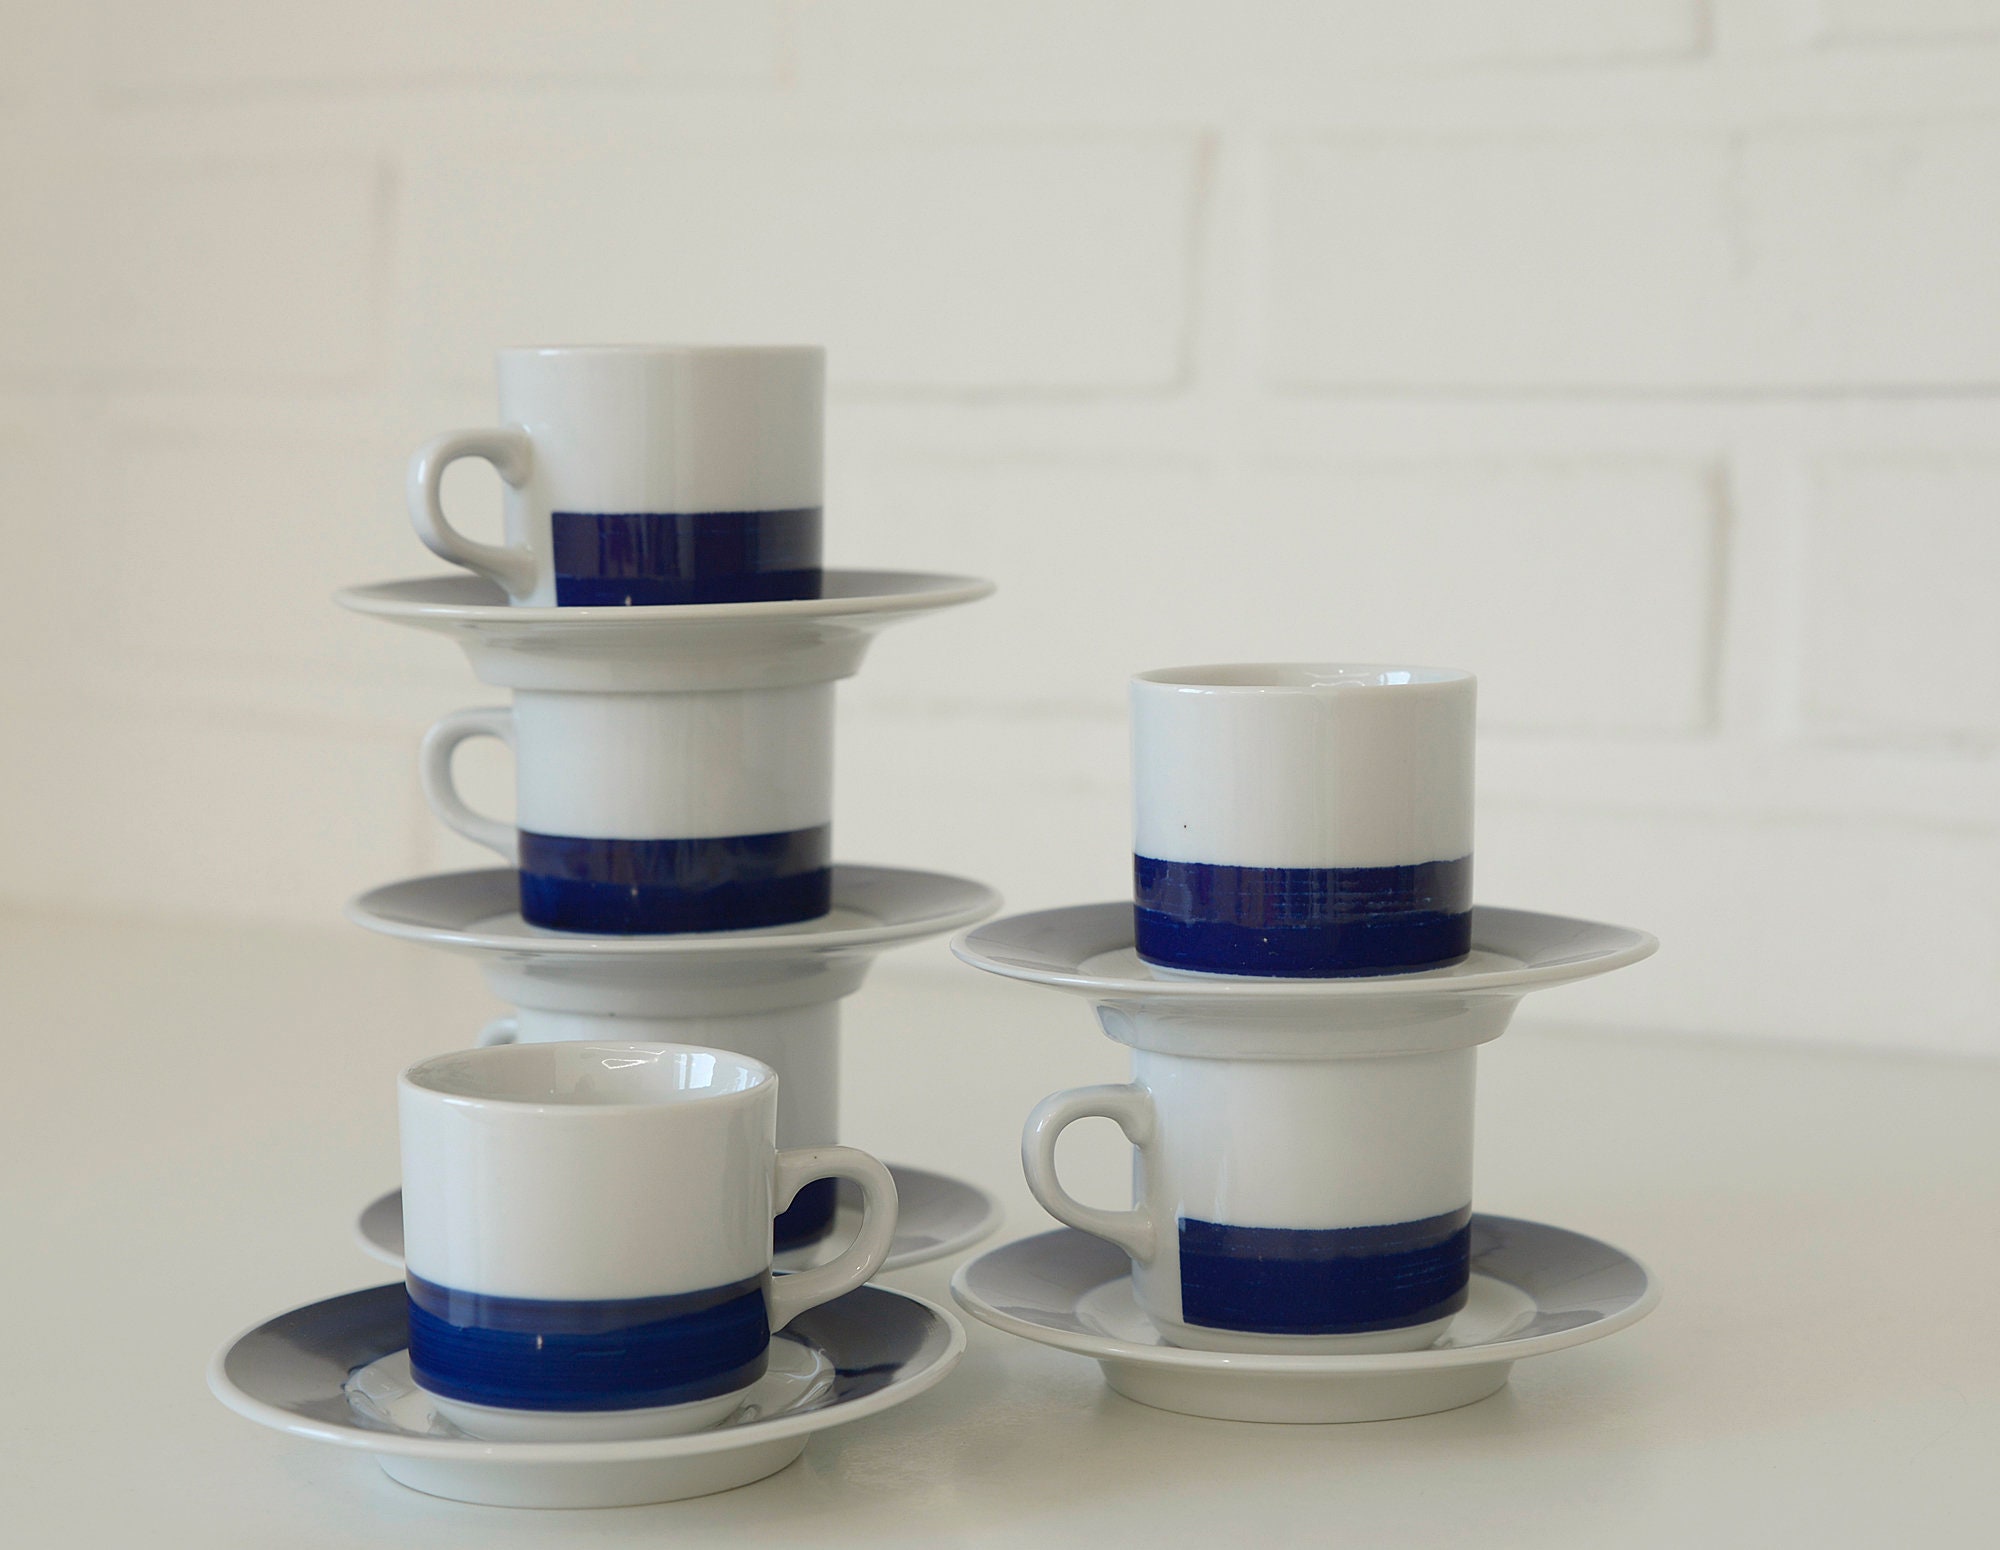 Buy Extra Thick-Walled Italian Espresso Cups »Verona« (0.85 cm Cup Wall /  Maximum 65 ml), Handmade (6 Cups & Saucers) / Made in Italy Online at  desertcartIsrael